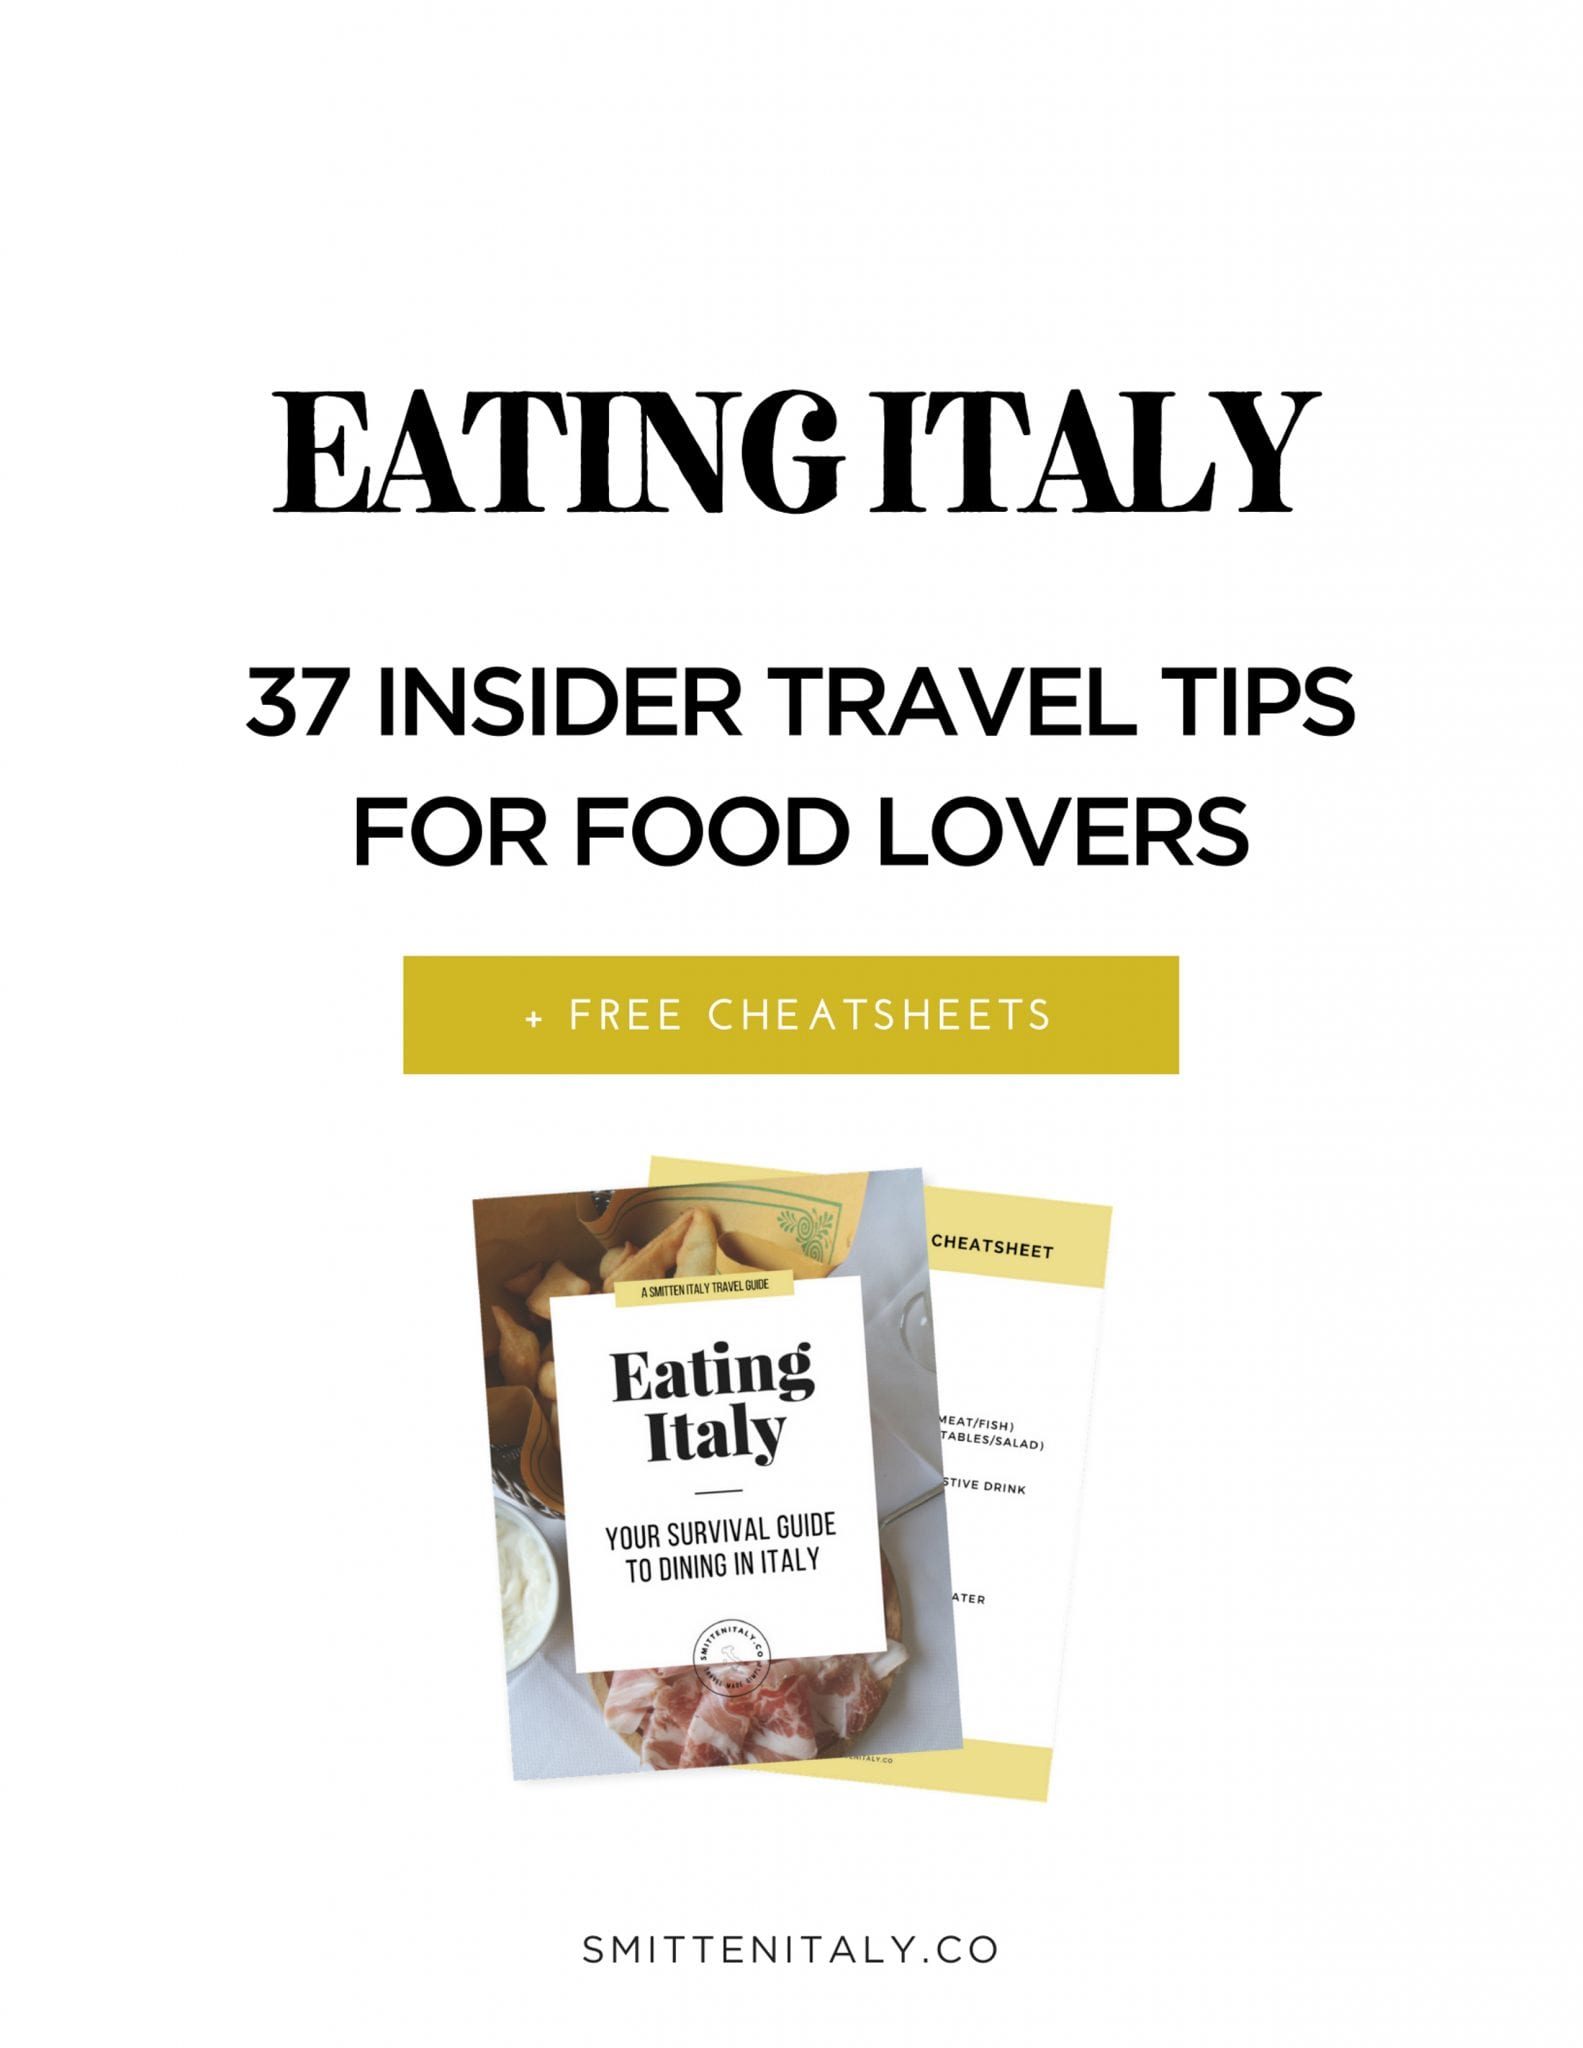 Eating Italy (37 tips for food lovers)